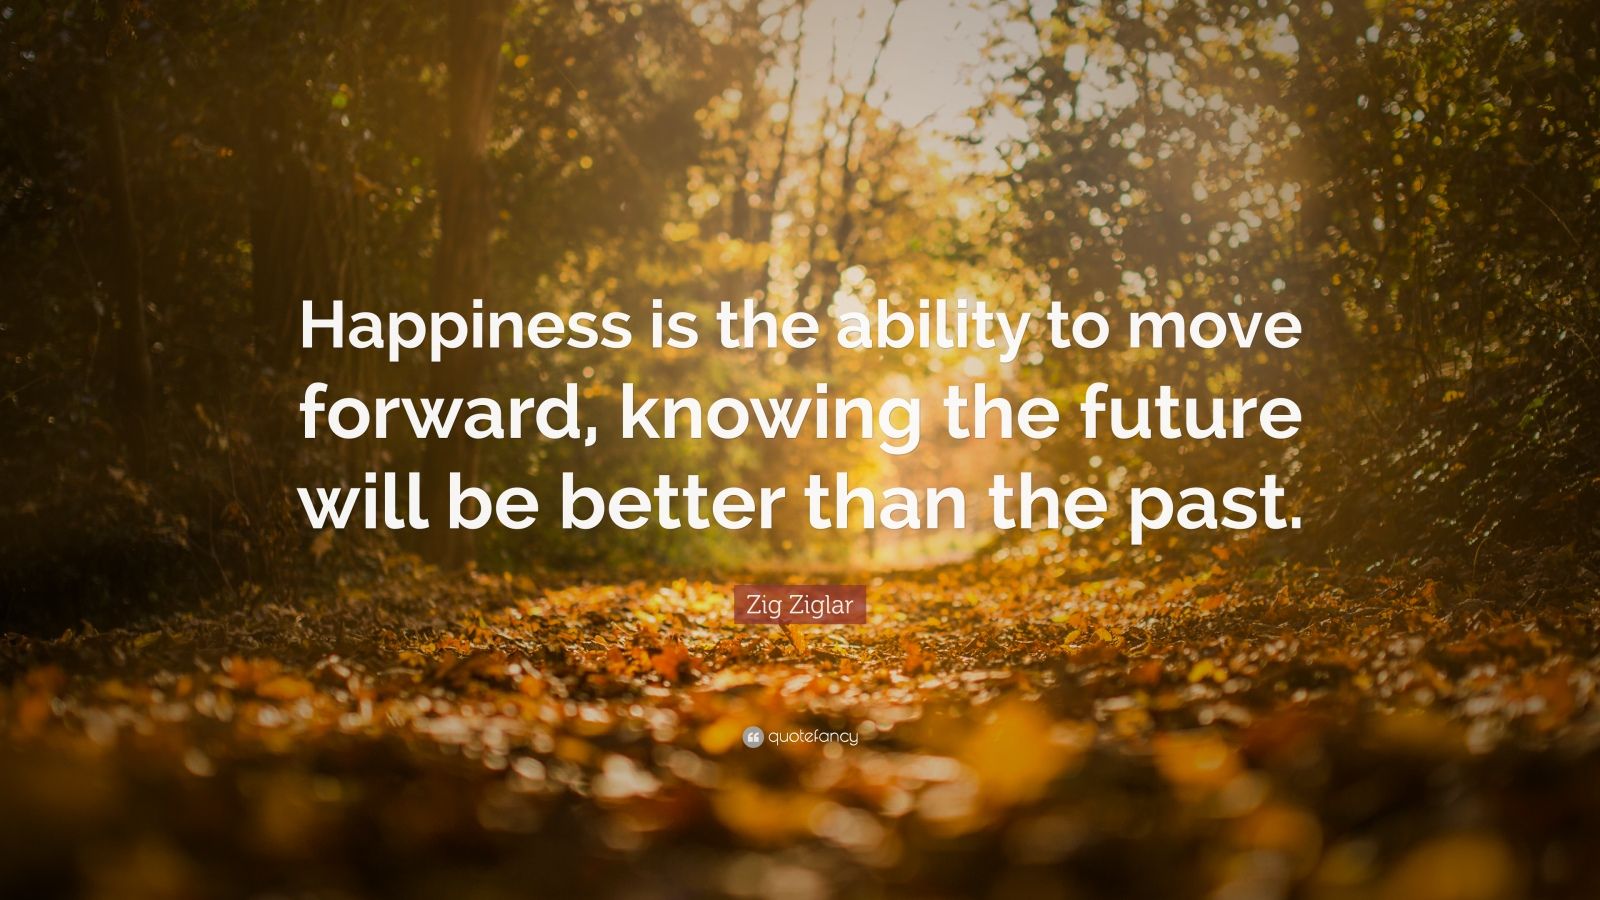 Zig Ziglar Quote: “Happiness is the ability to move forward, knowing